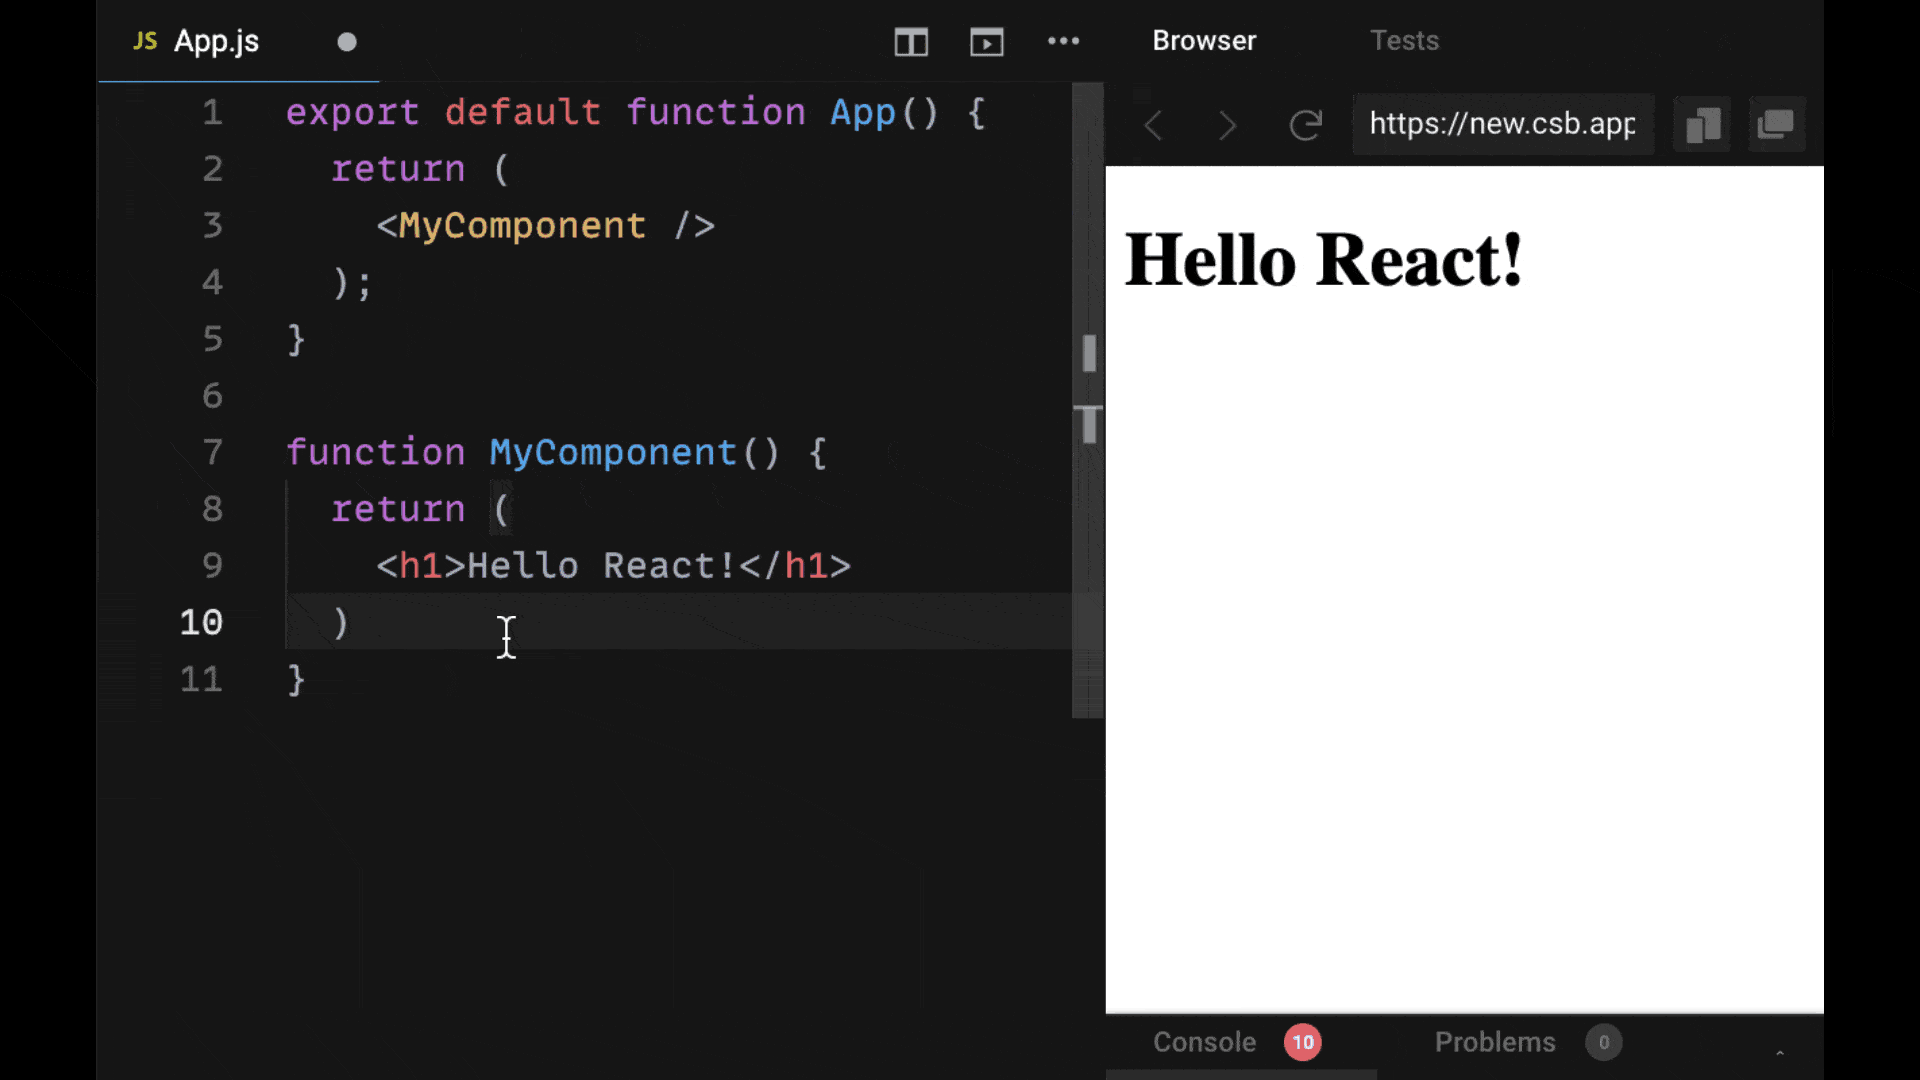 React Props Cheatsheet: 10 Patterns You Should Know